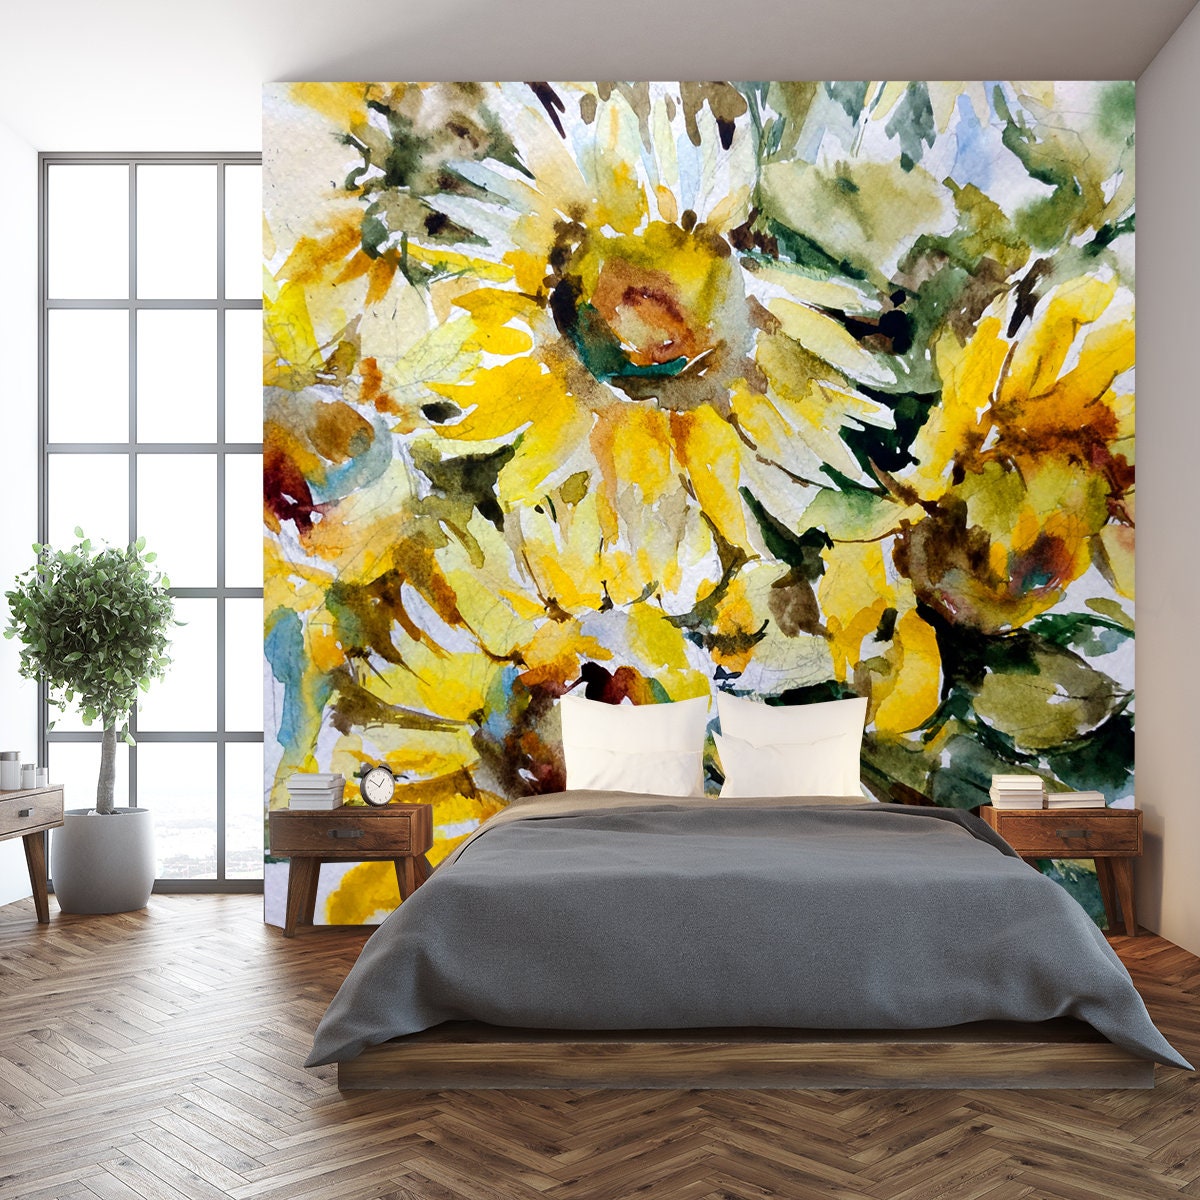 Abstract Bright Colored Decorative Background. Beautiful Tender Romantic Bouquet of Summer Wildflowers Wallpaper Bedroom Mural